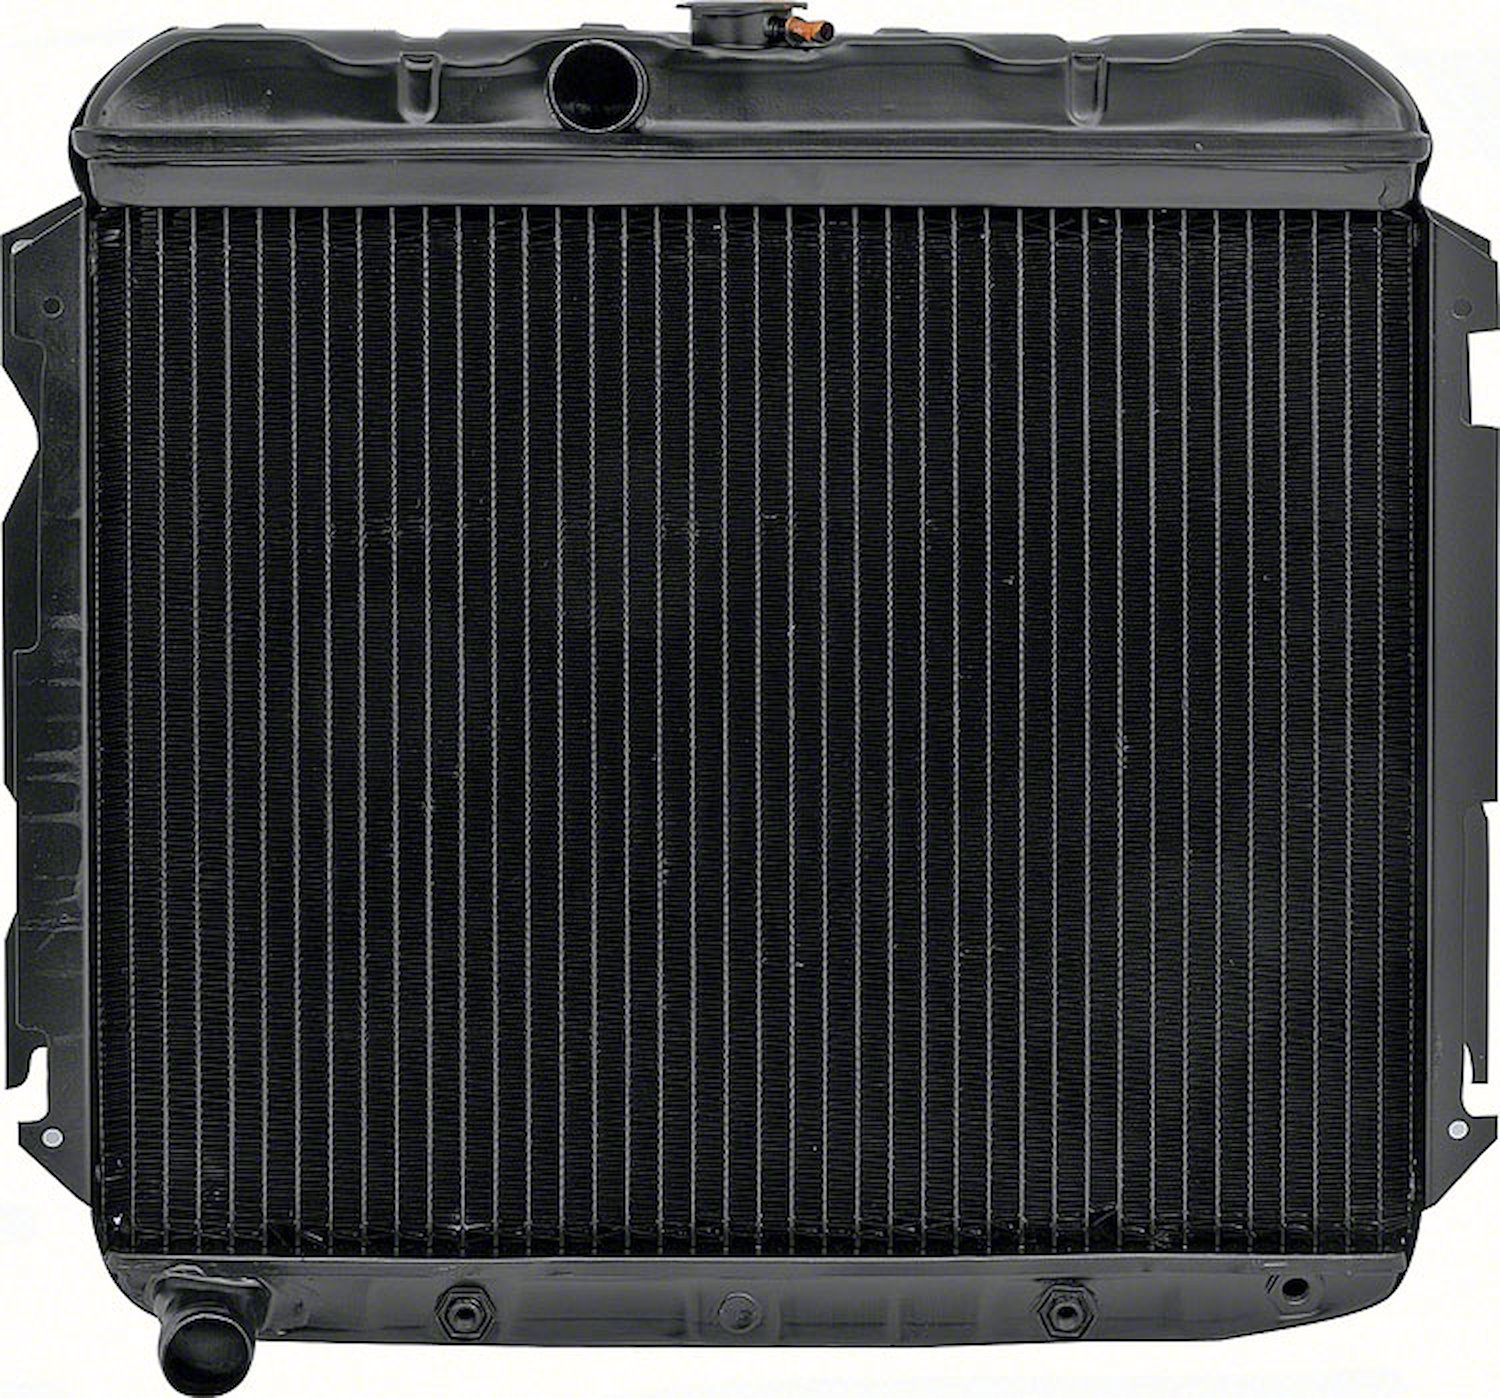 MB2368A Replacement Radiator 1966-69 Mopar B-Body V8 318Ci/340Ci With Automatic Trans 3 Row 26" Wide